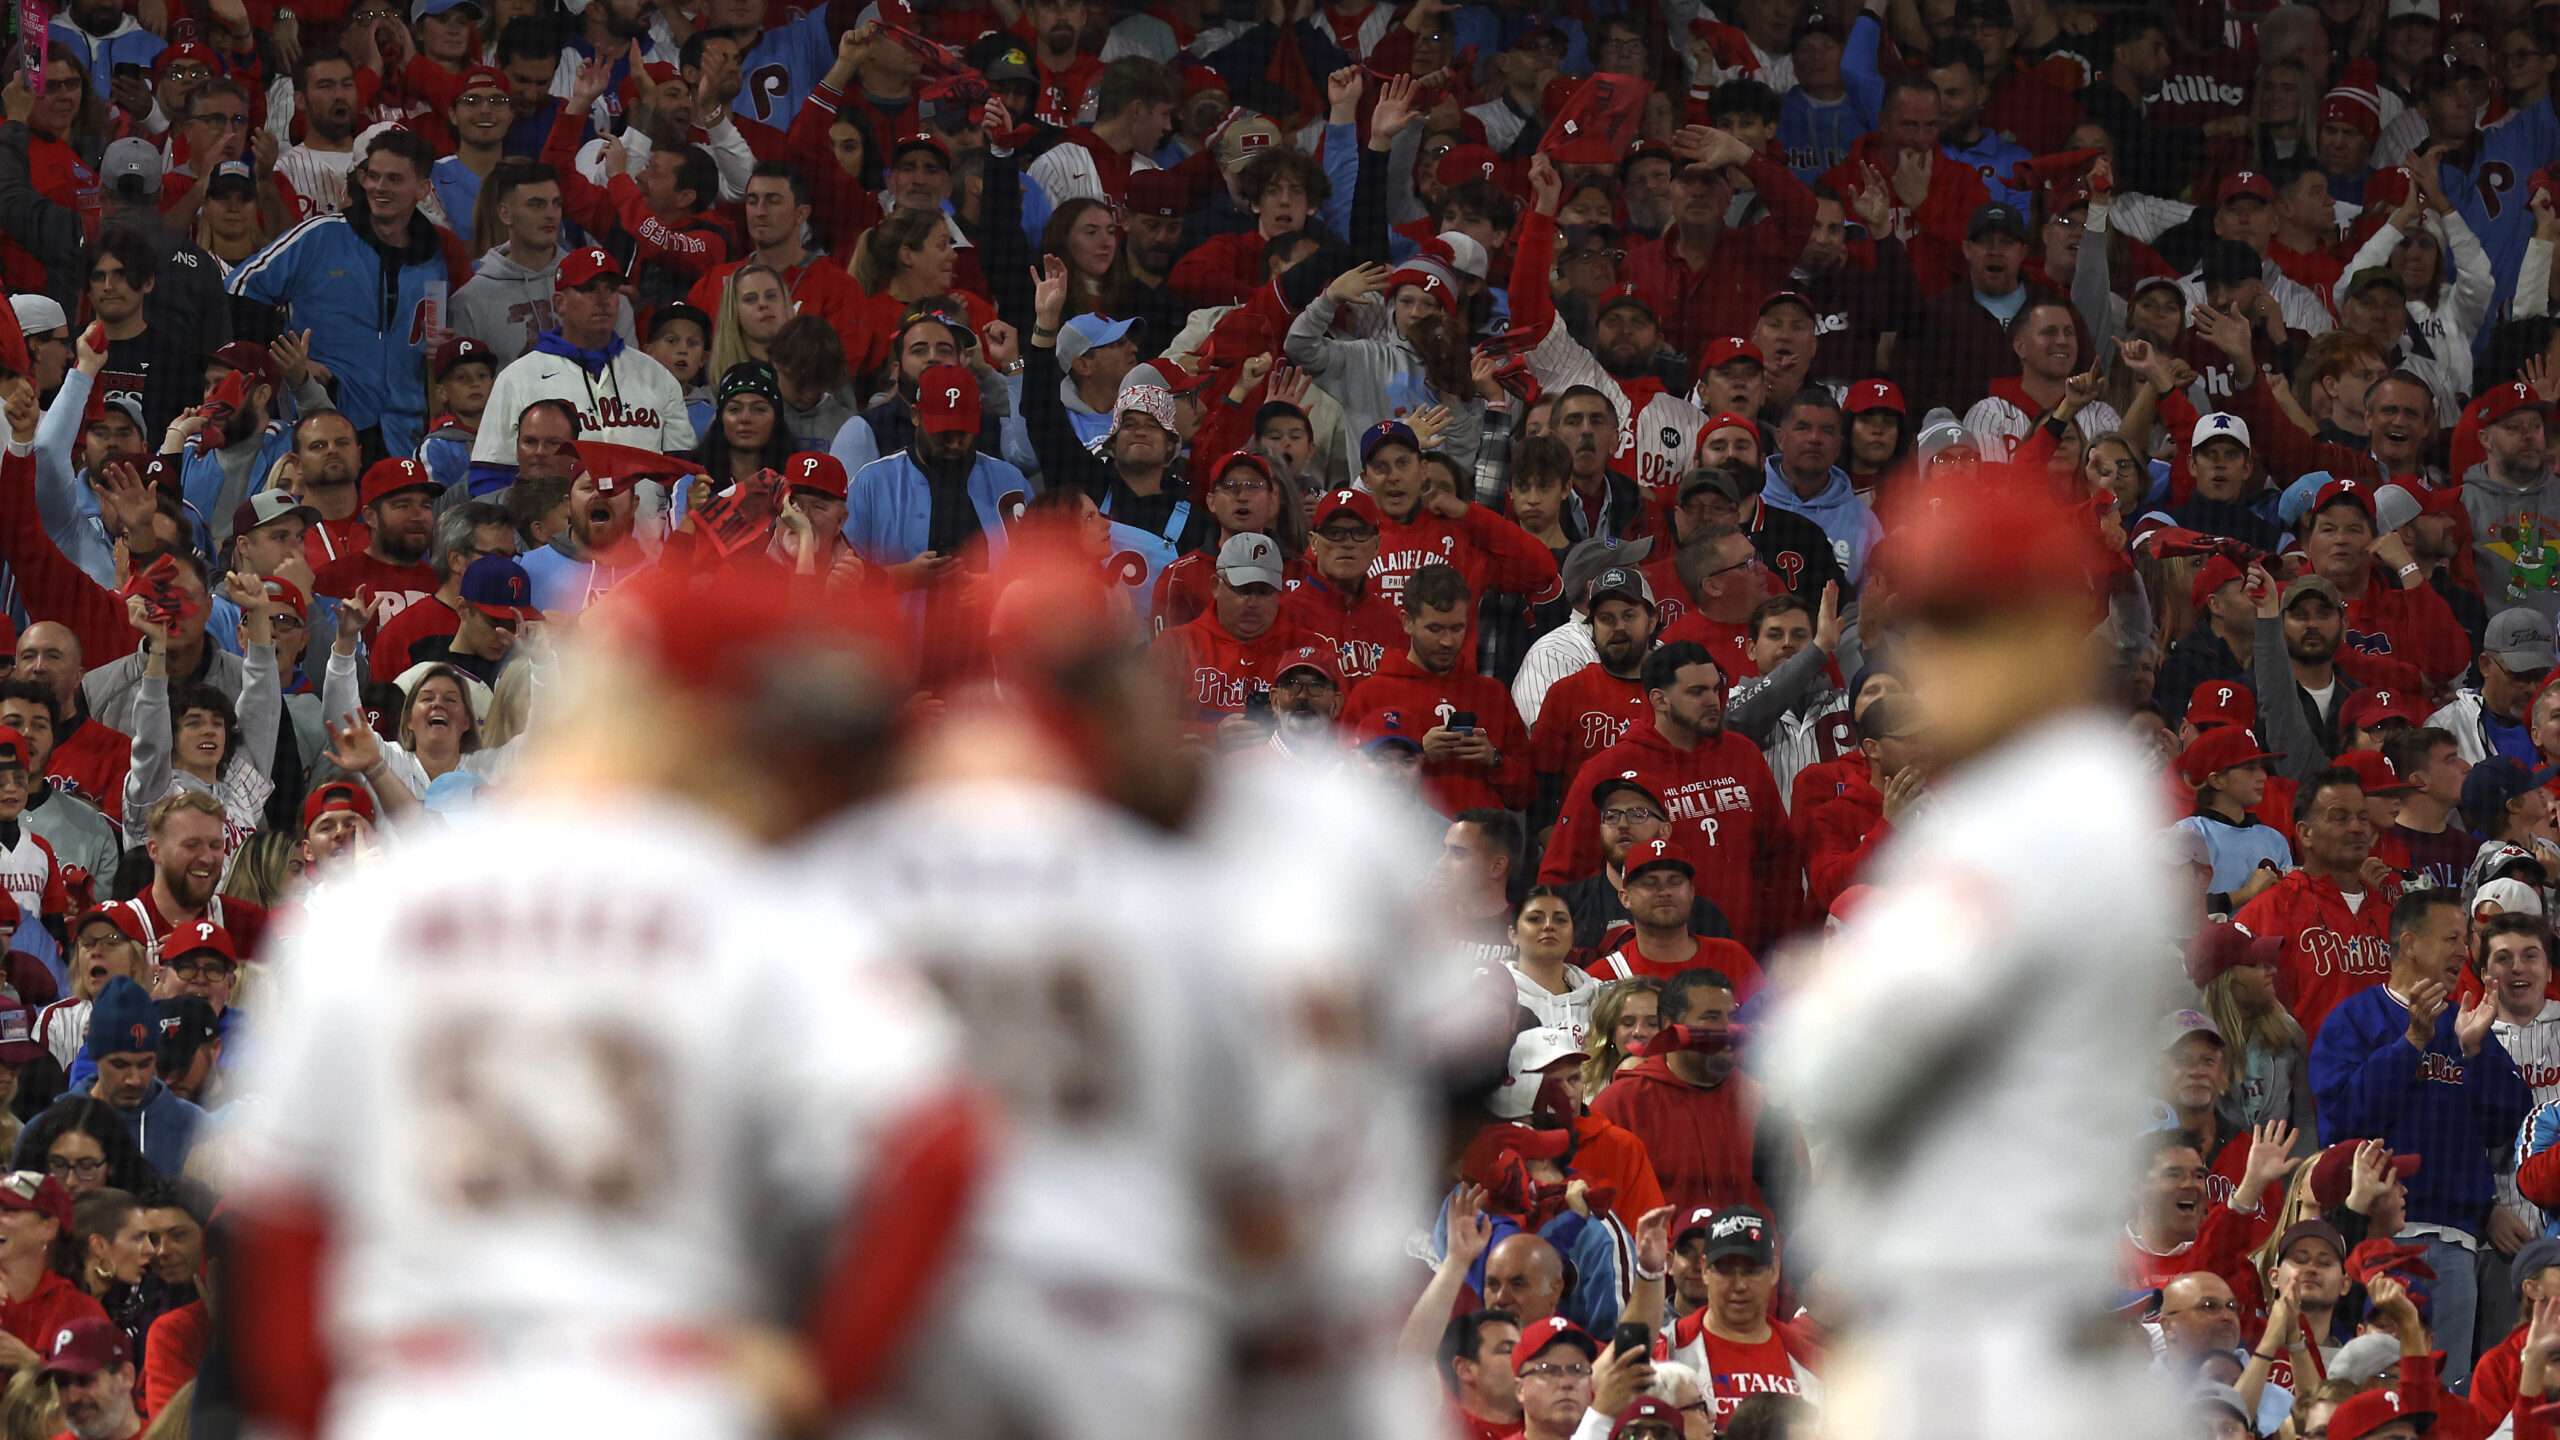 In a season of extremes for the Diamondbacks, they're losing their identity at the wrong time